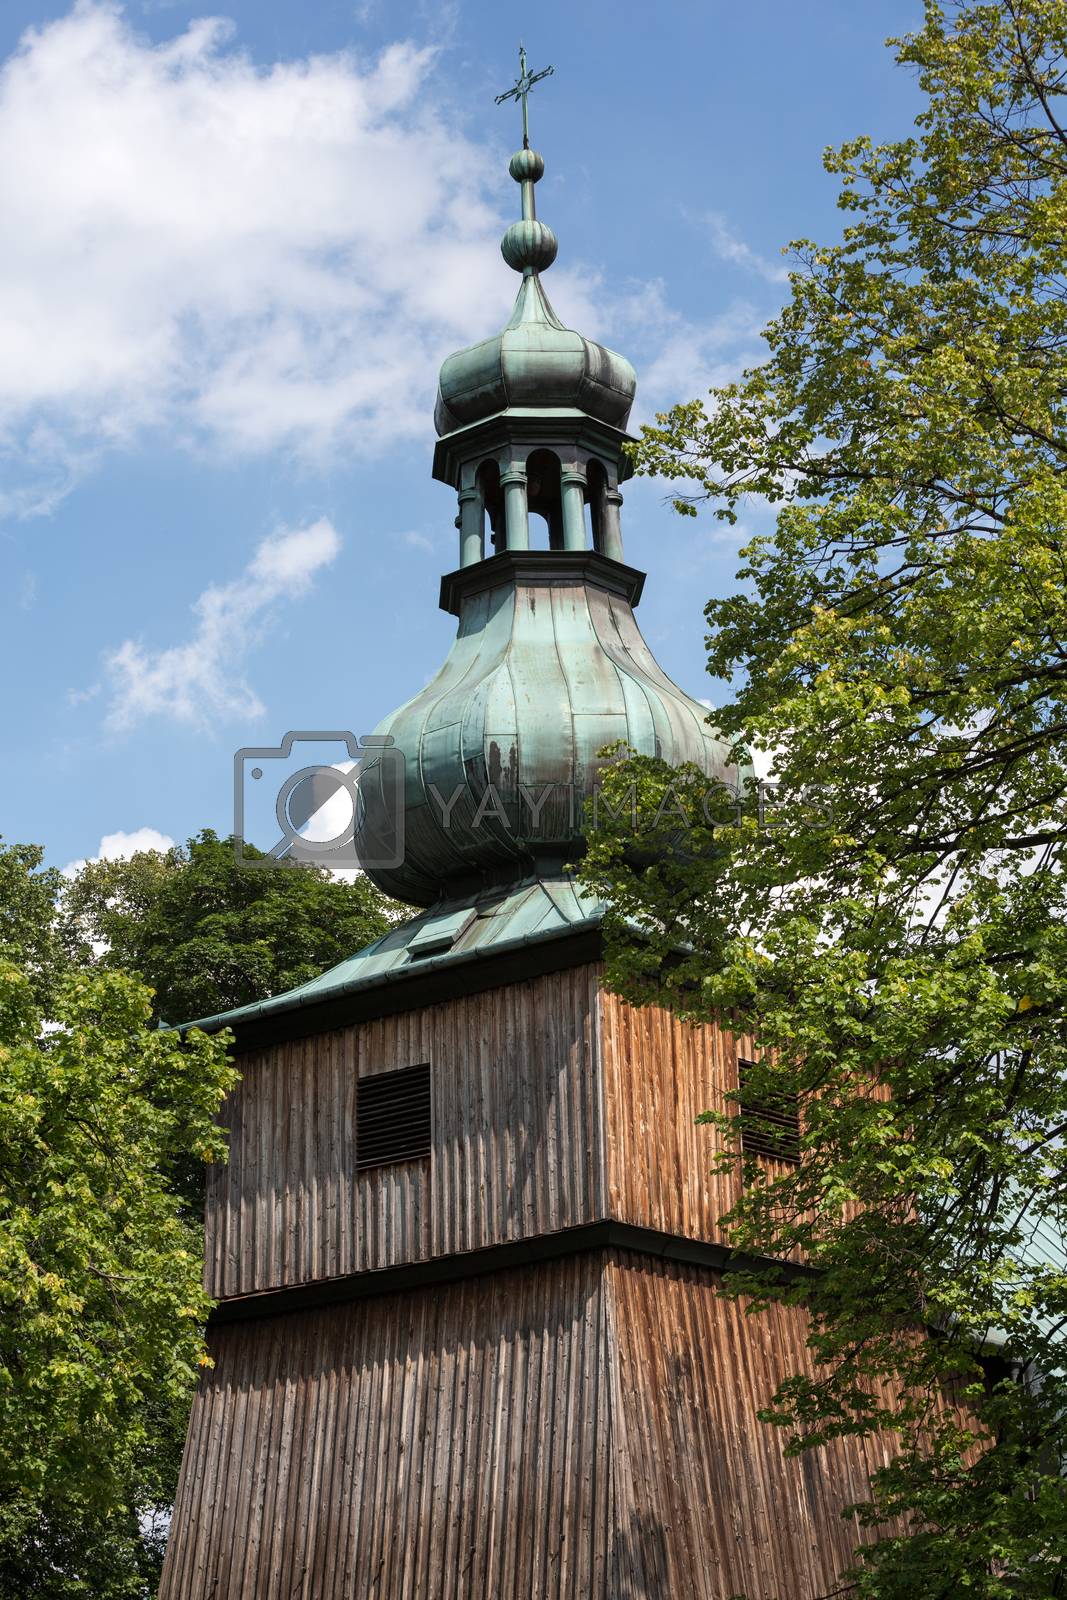 Royalty free image of the wooden antique church in Podstolice near Cracow. Poland by wjarek